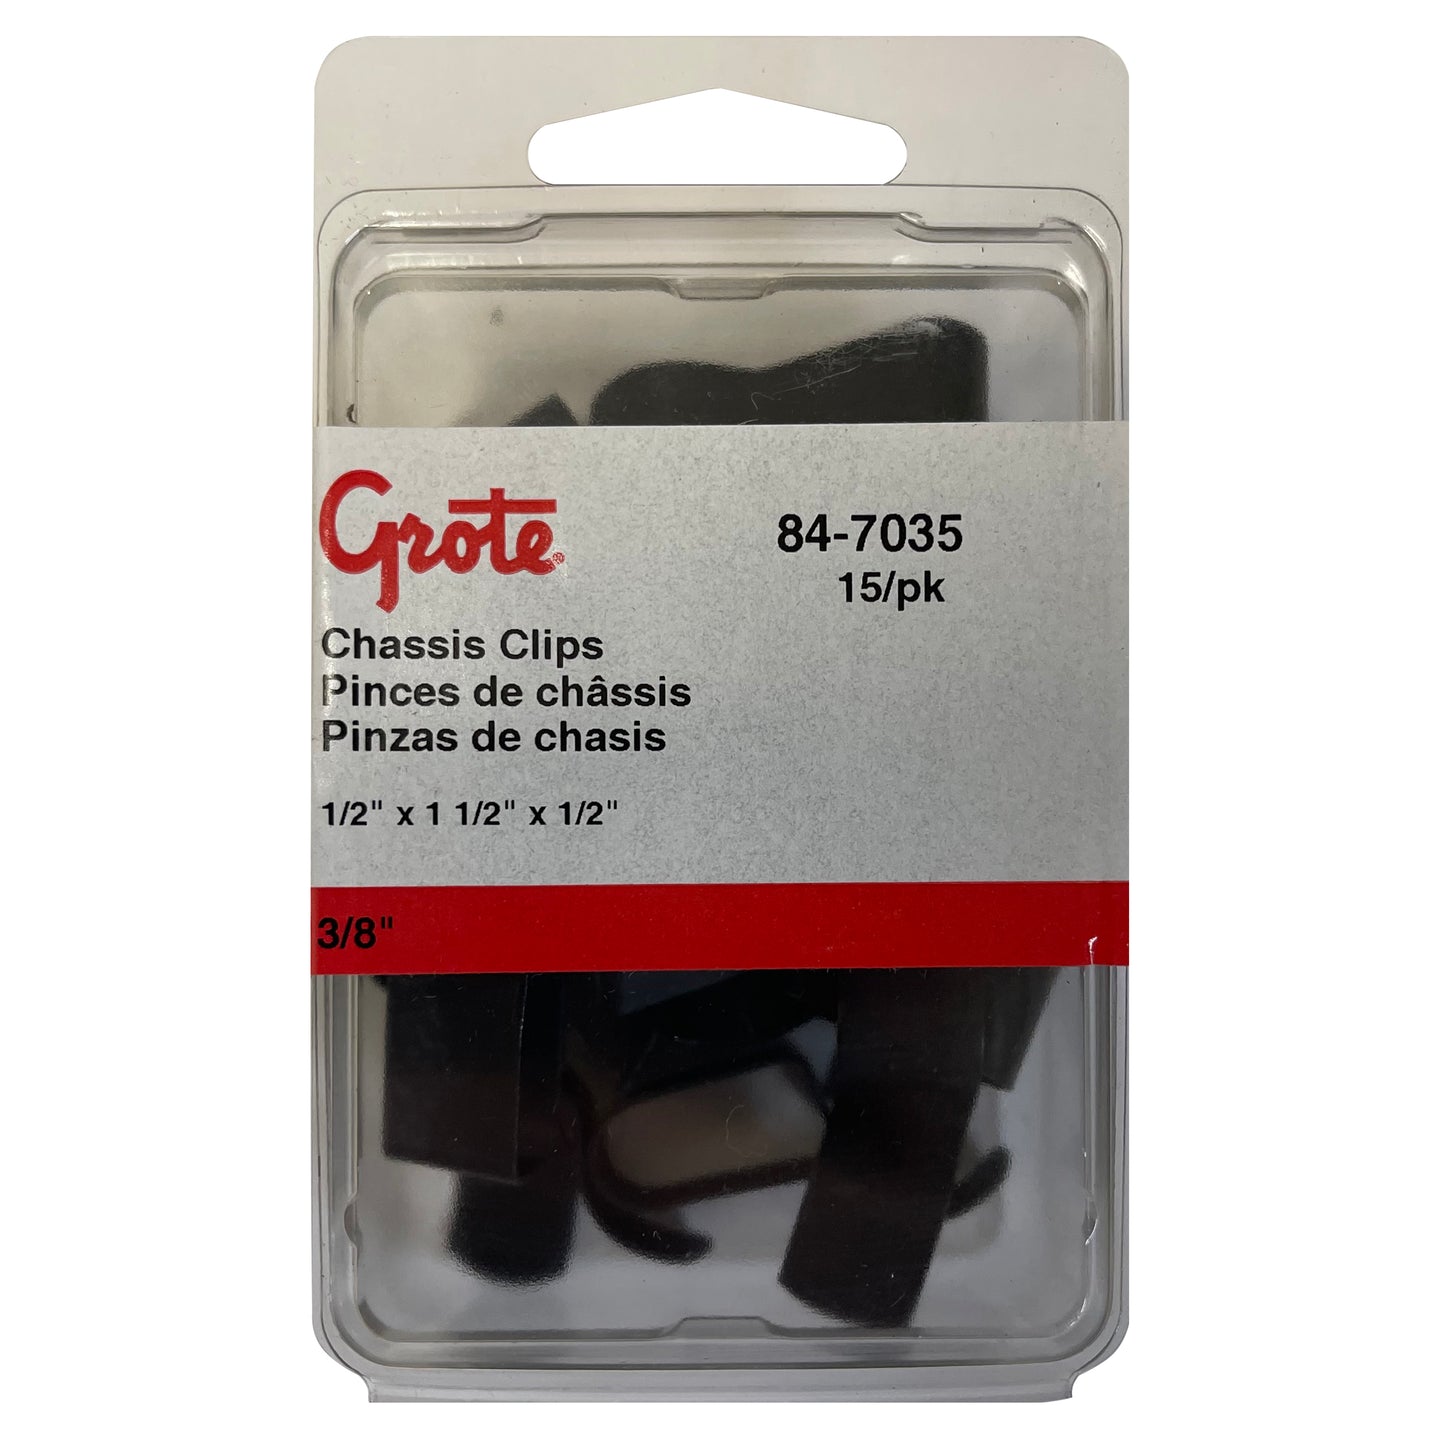 Chassis Clip 3/8 Inch - 15 Pack